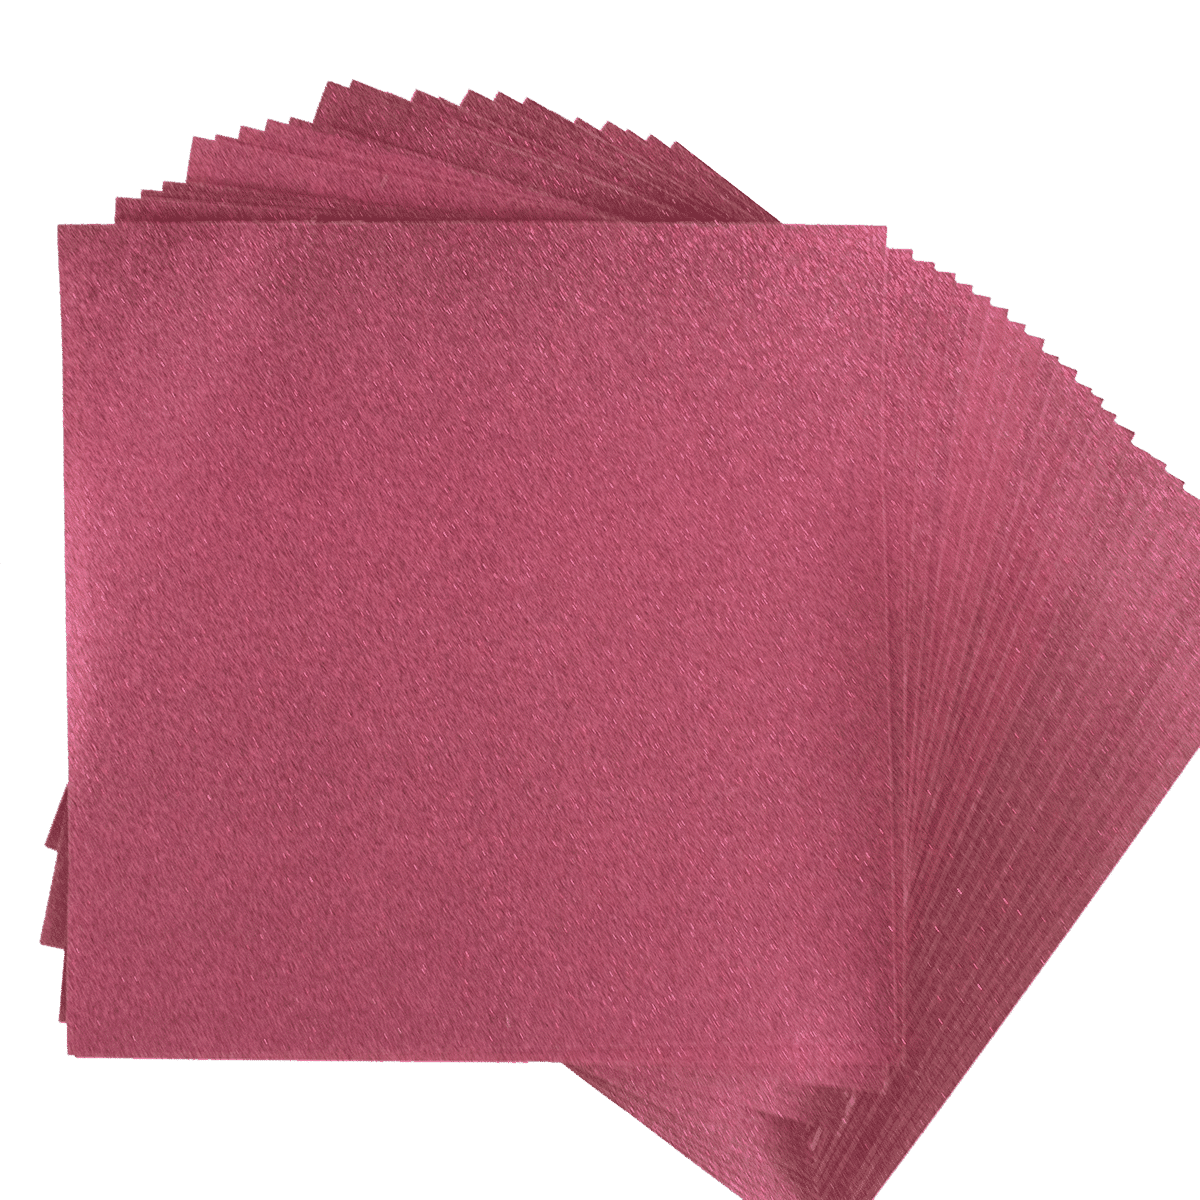 a stack of pink napkins on a white background.